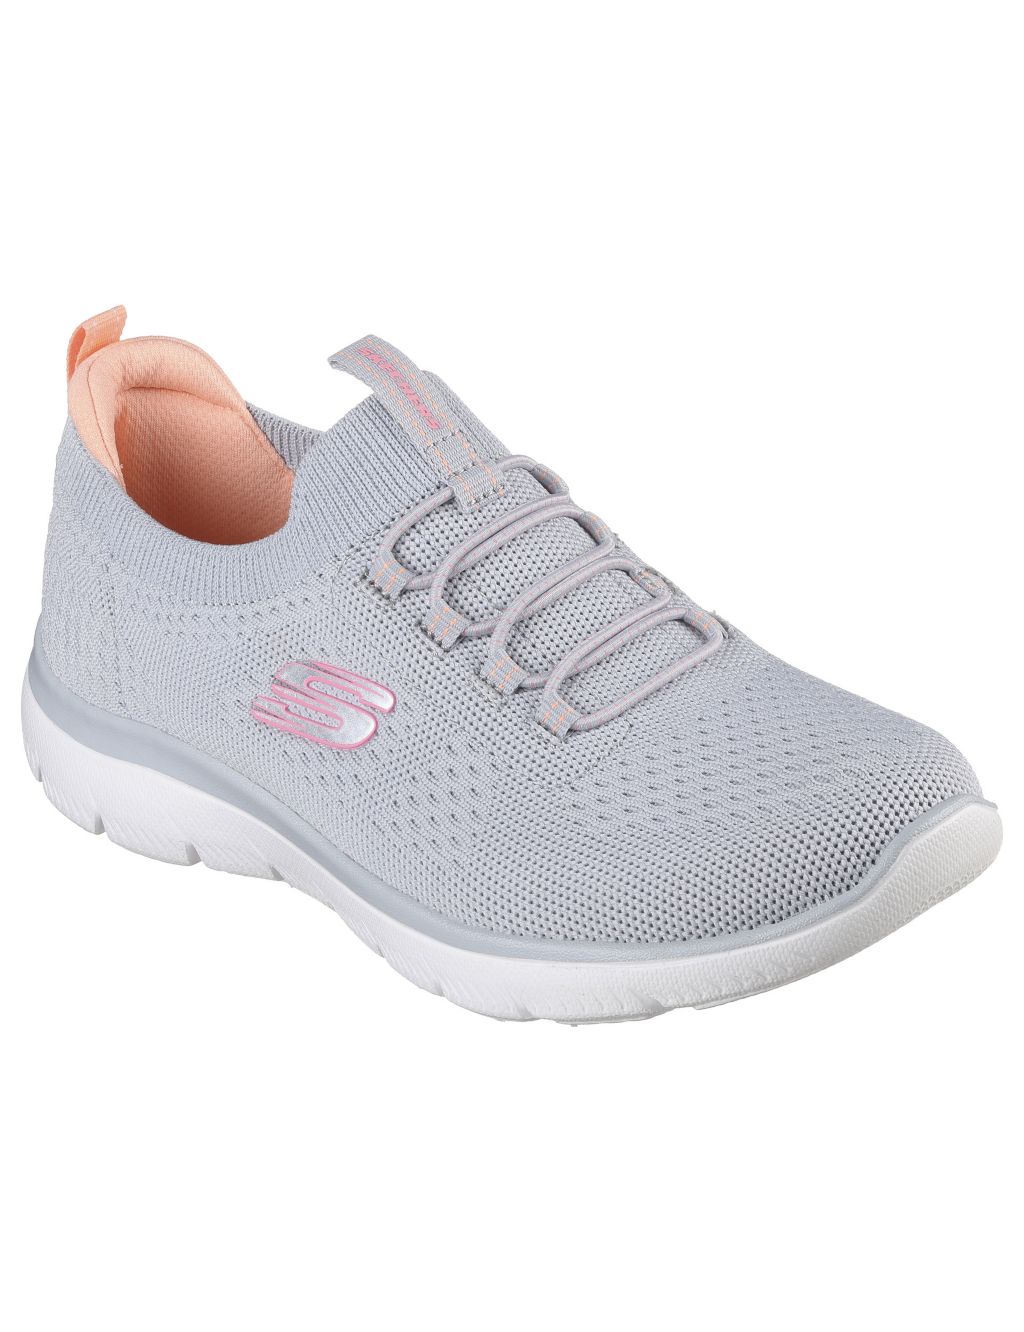 Summits Top Player Slip On Trainers | Skechers | M&S